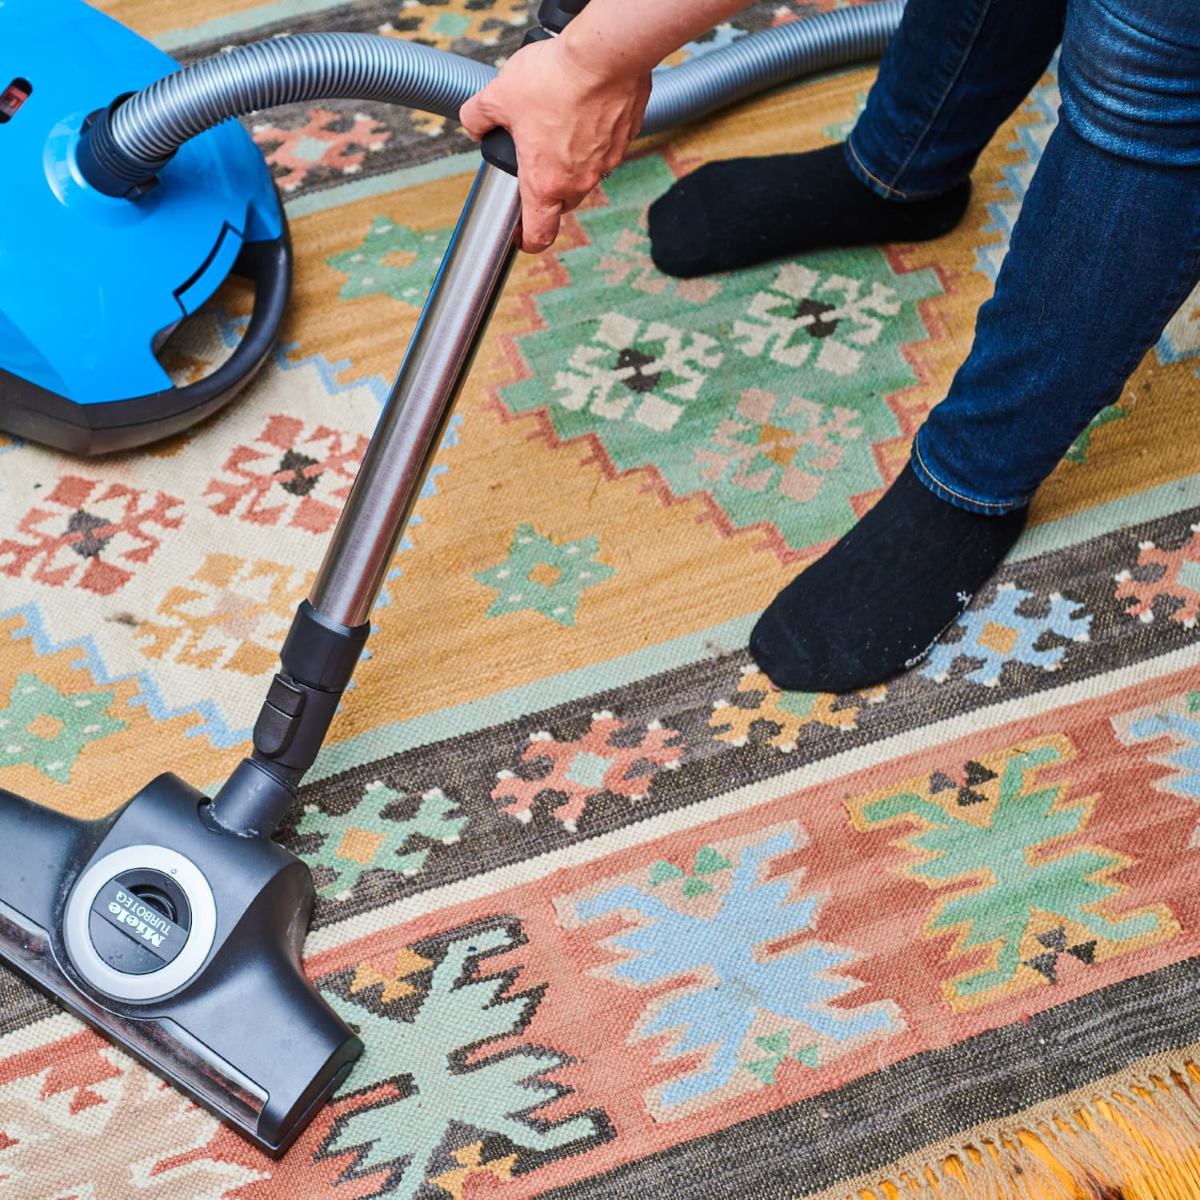 How To Clean A Home Carpet